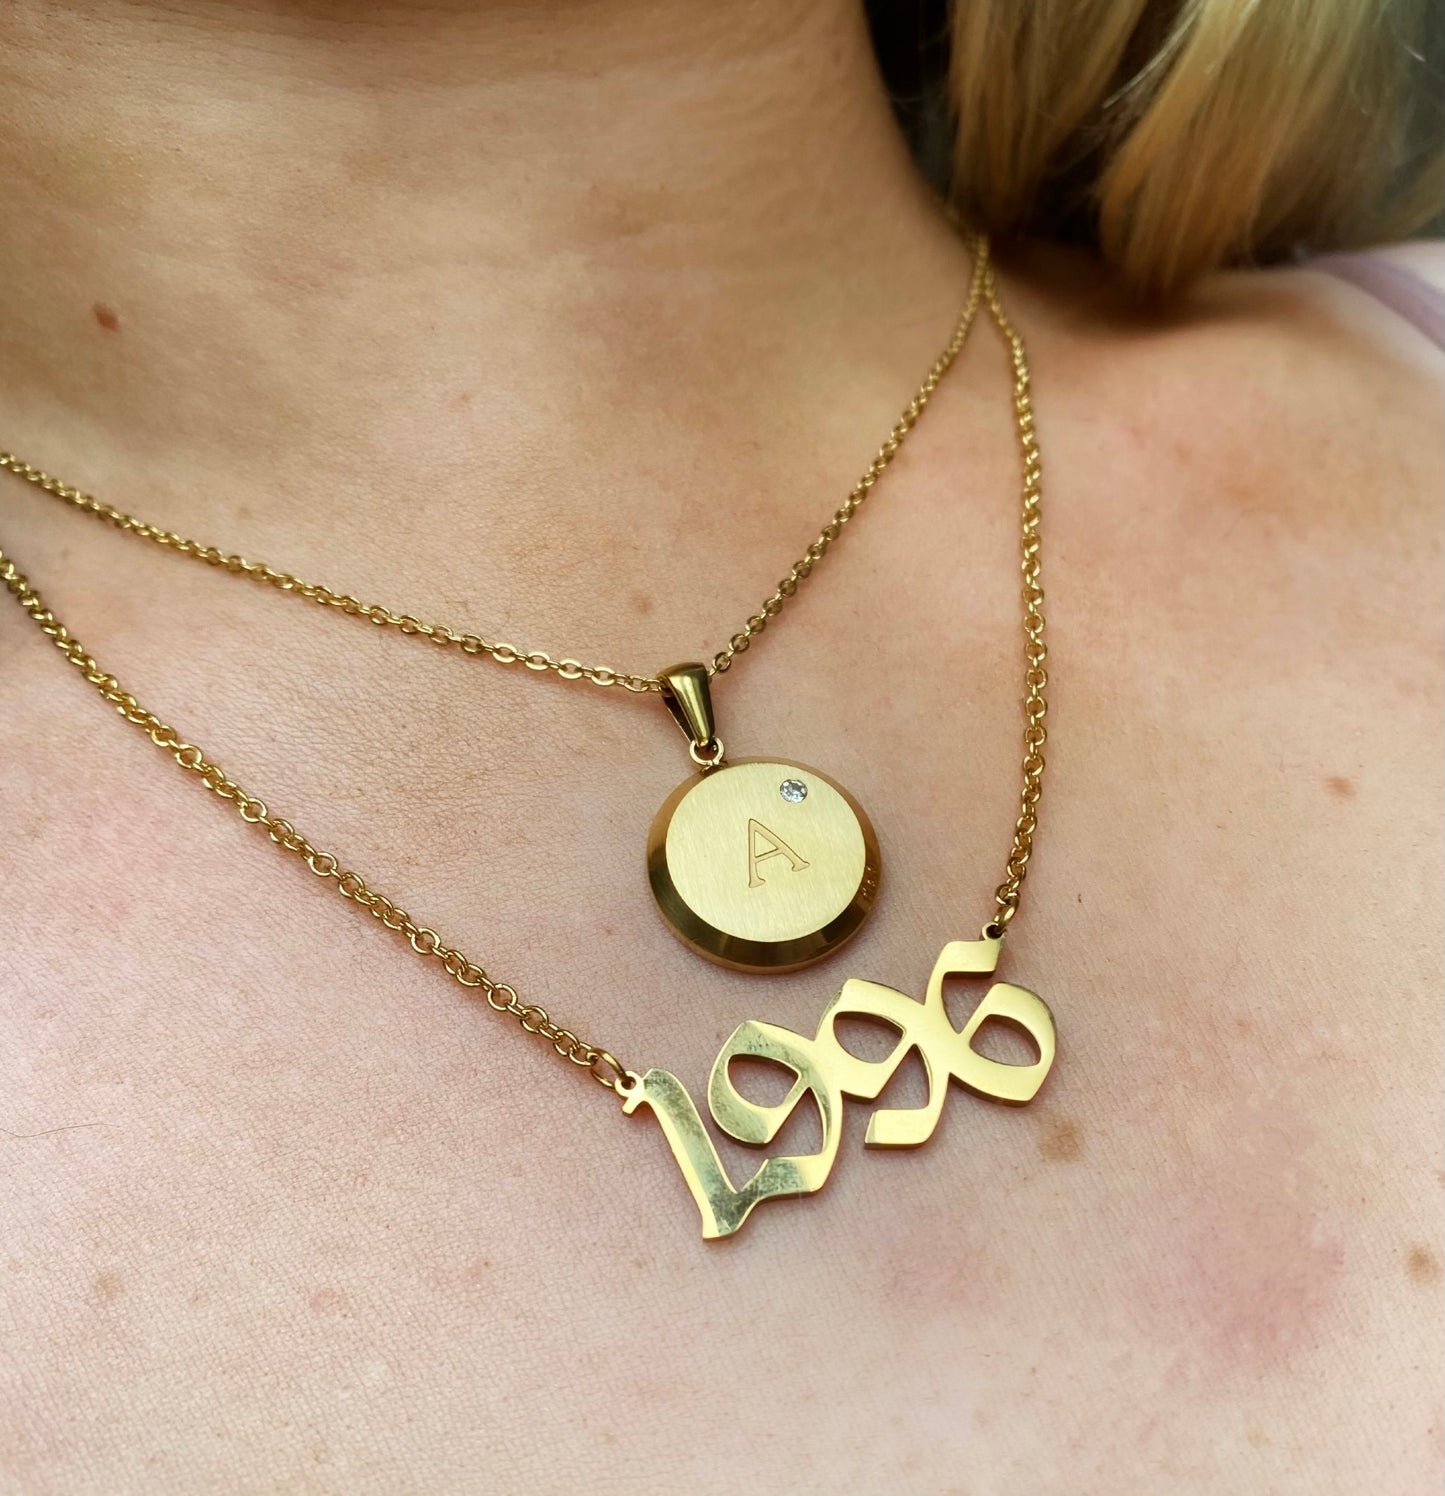 90's Birth Year Necklaces